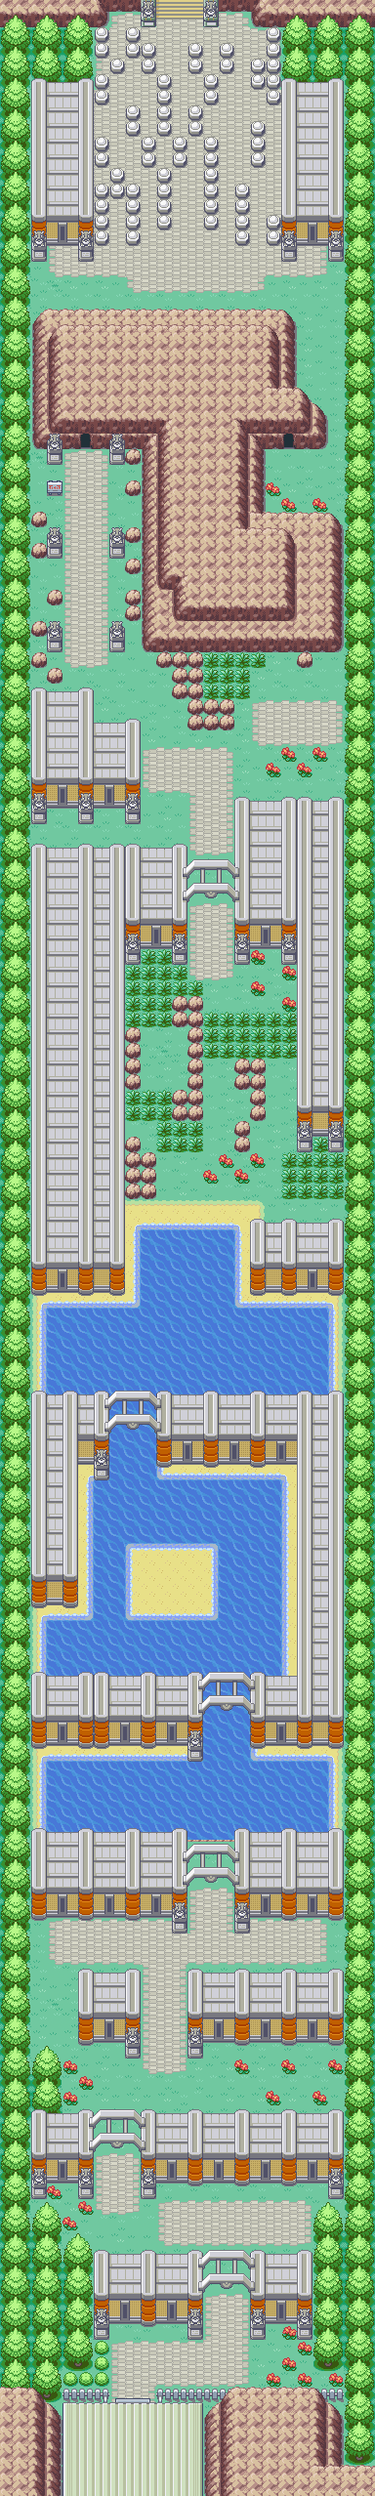 Route 23